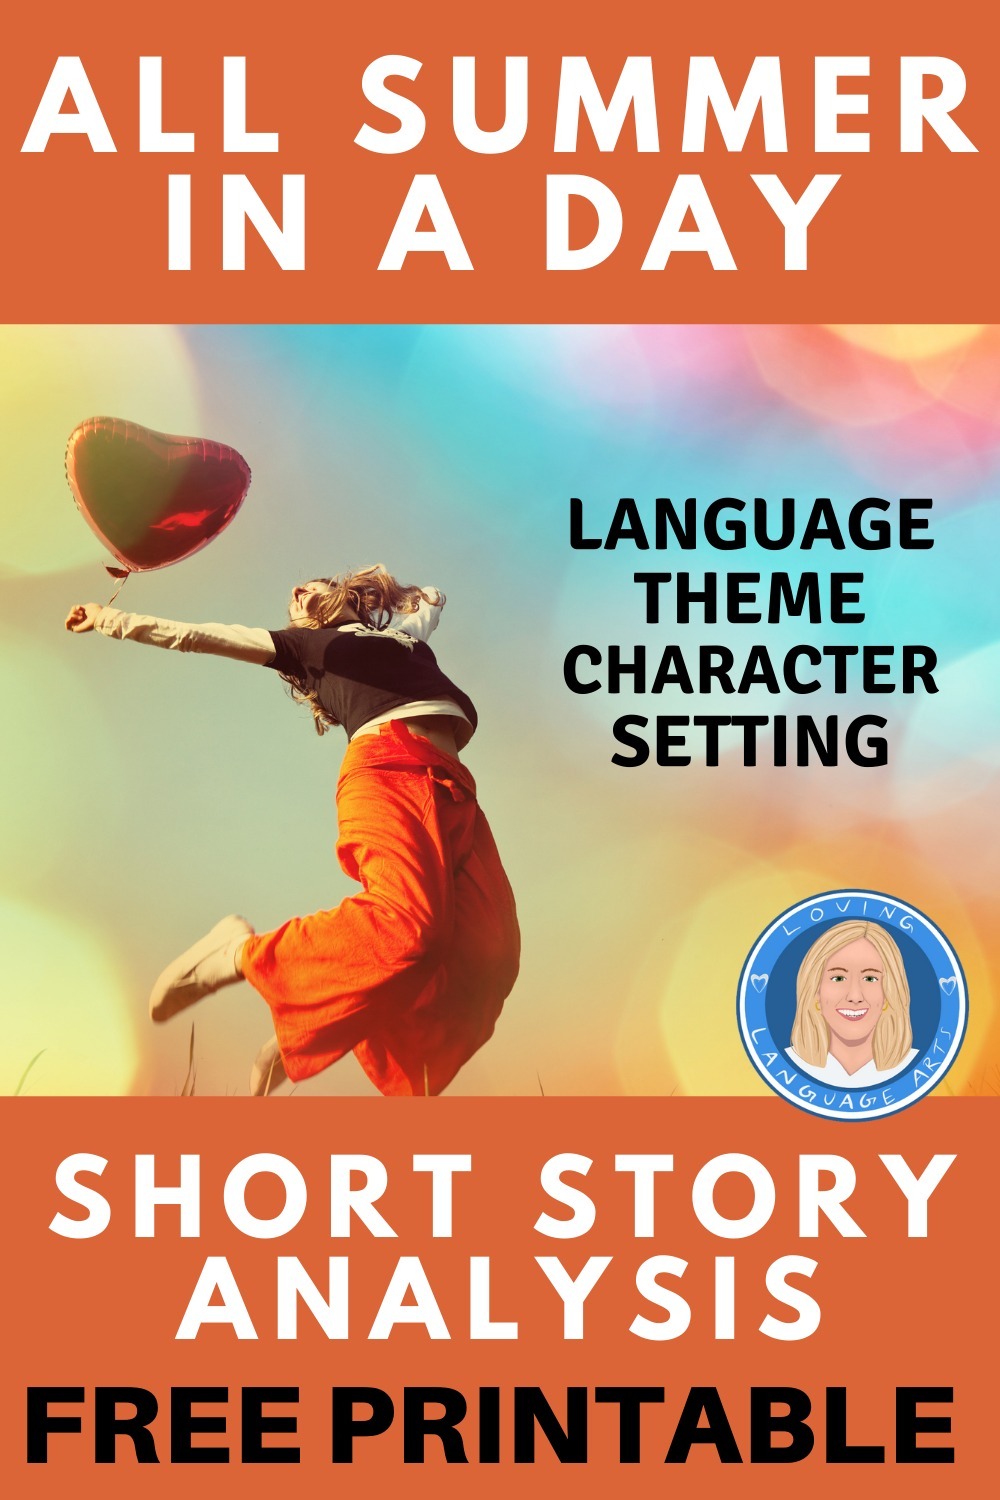 all summer in a day short story analysis free reading lessonpin 